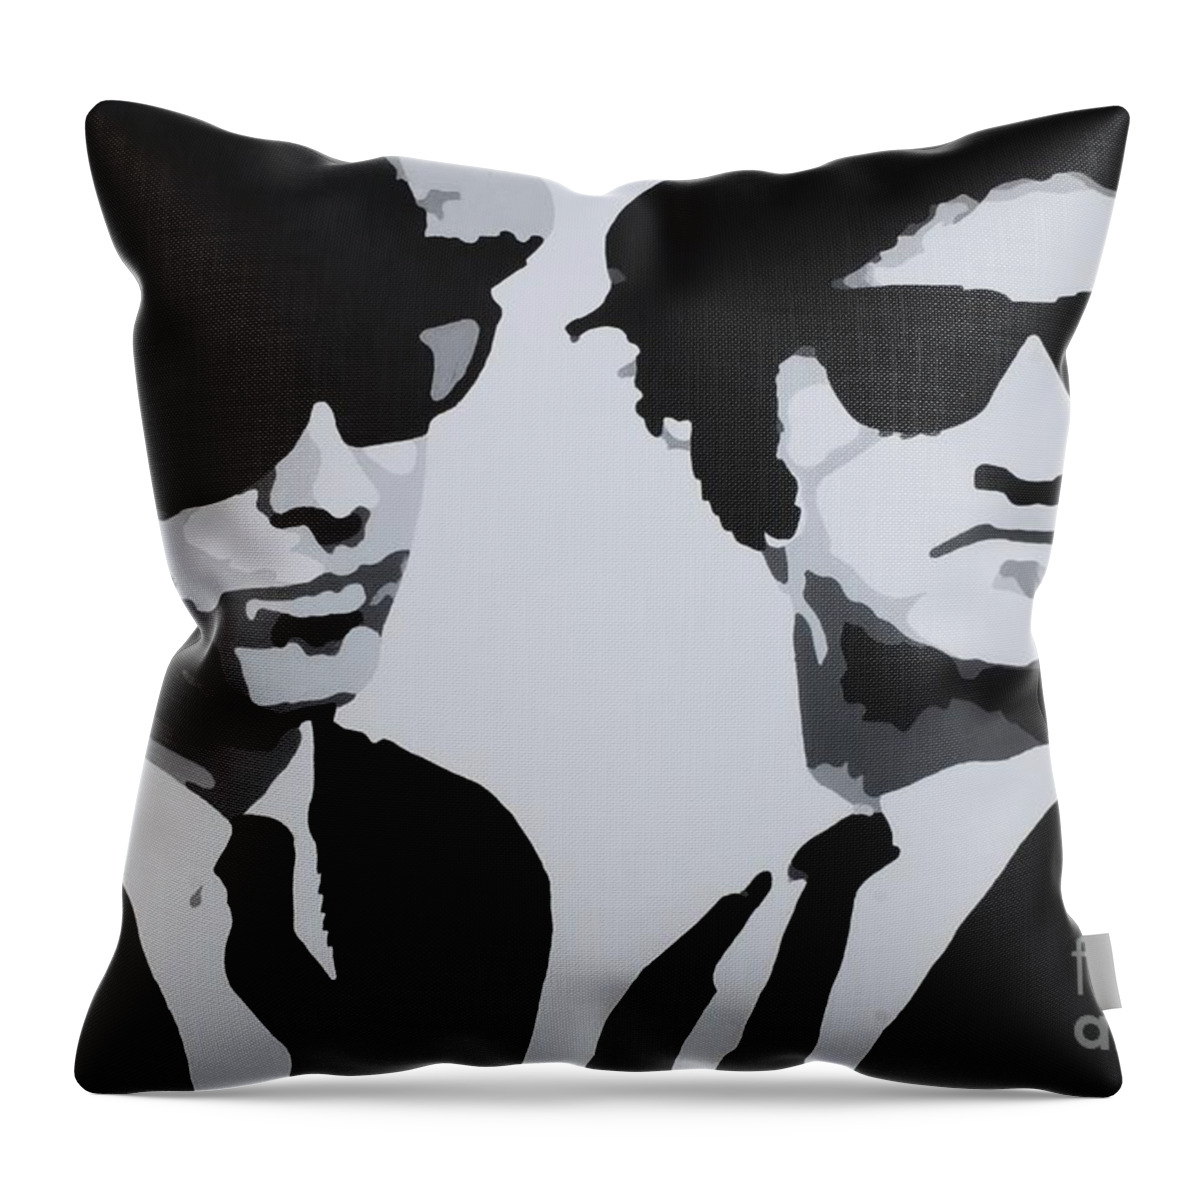 Blues Brothers Throw Pillow featuring the painting Blues Brothers by Katharina Bruenen